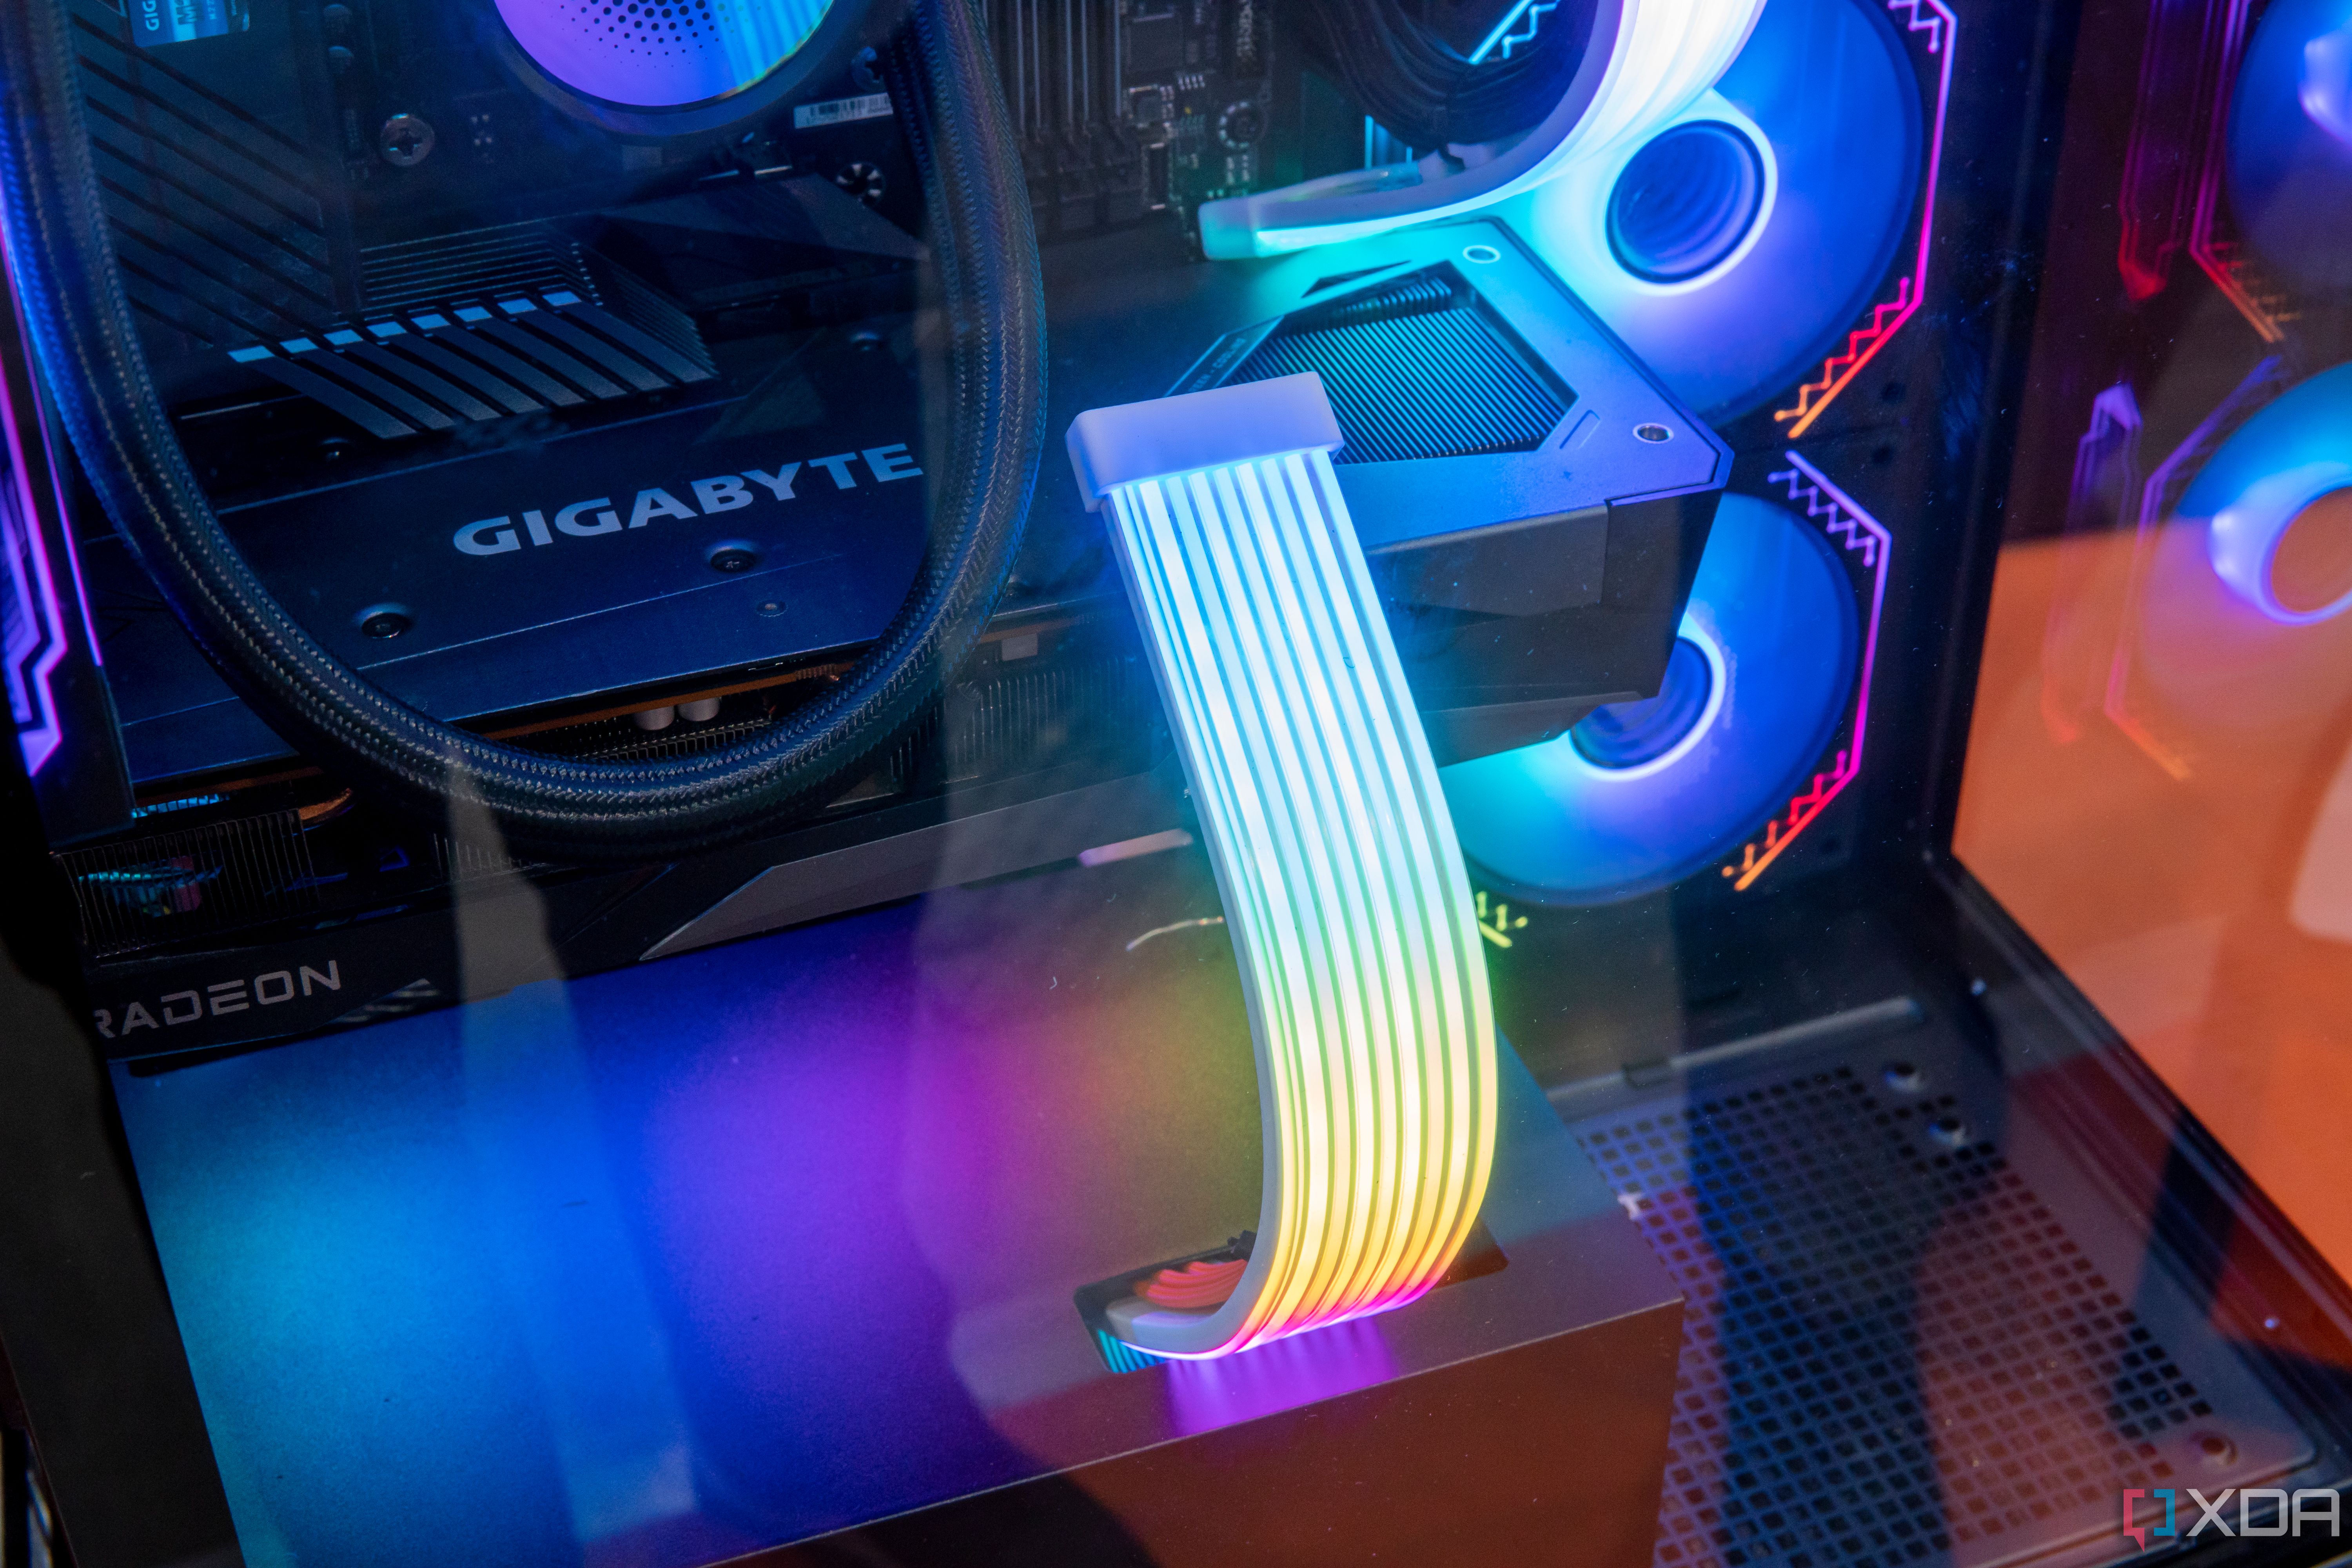 Close-up view of the Xigmatek Endorphin 9 showing RGB cables